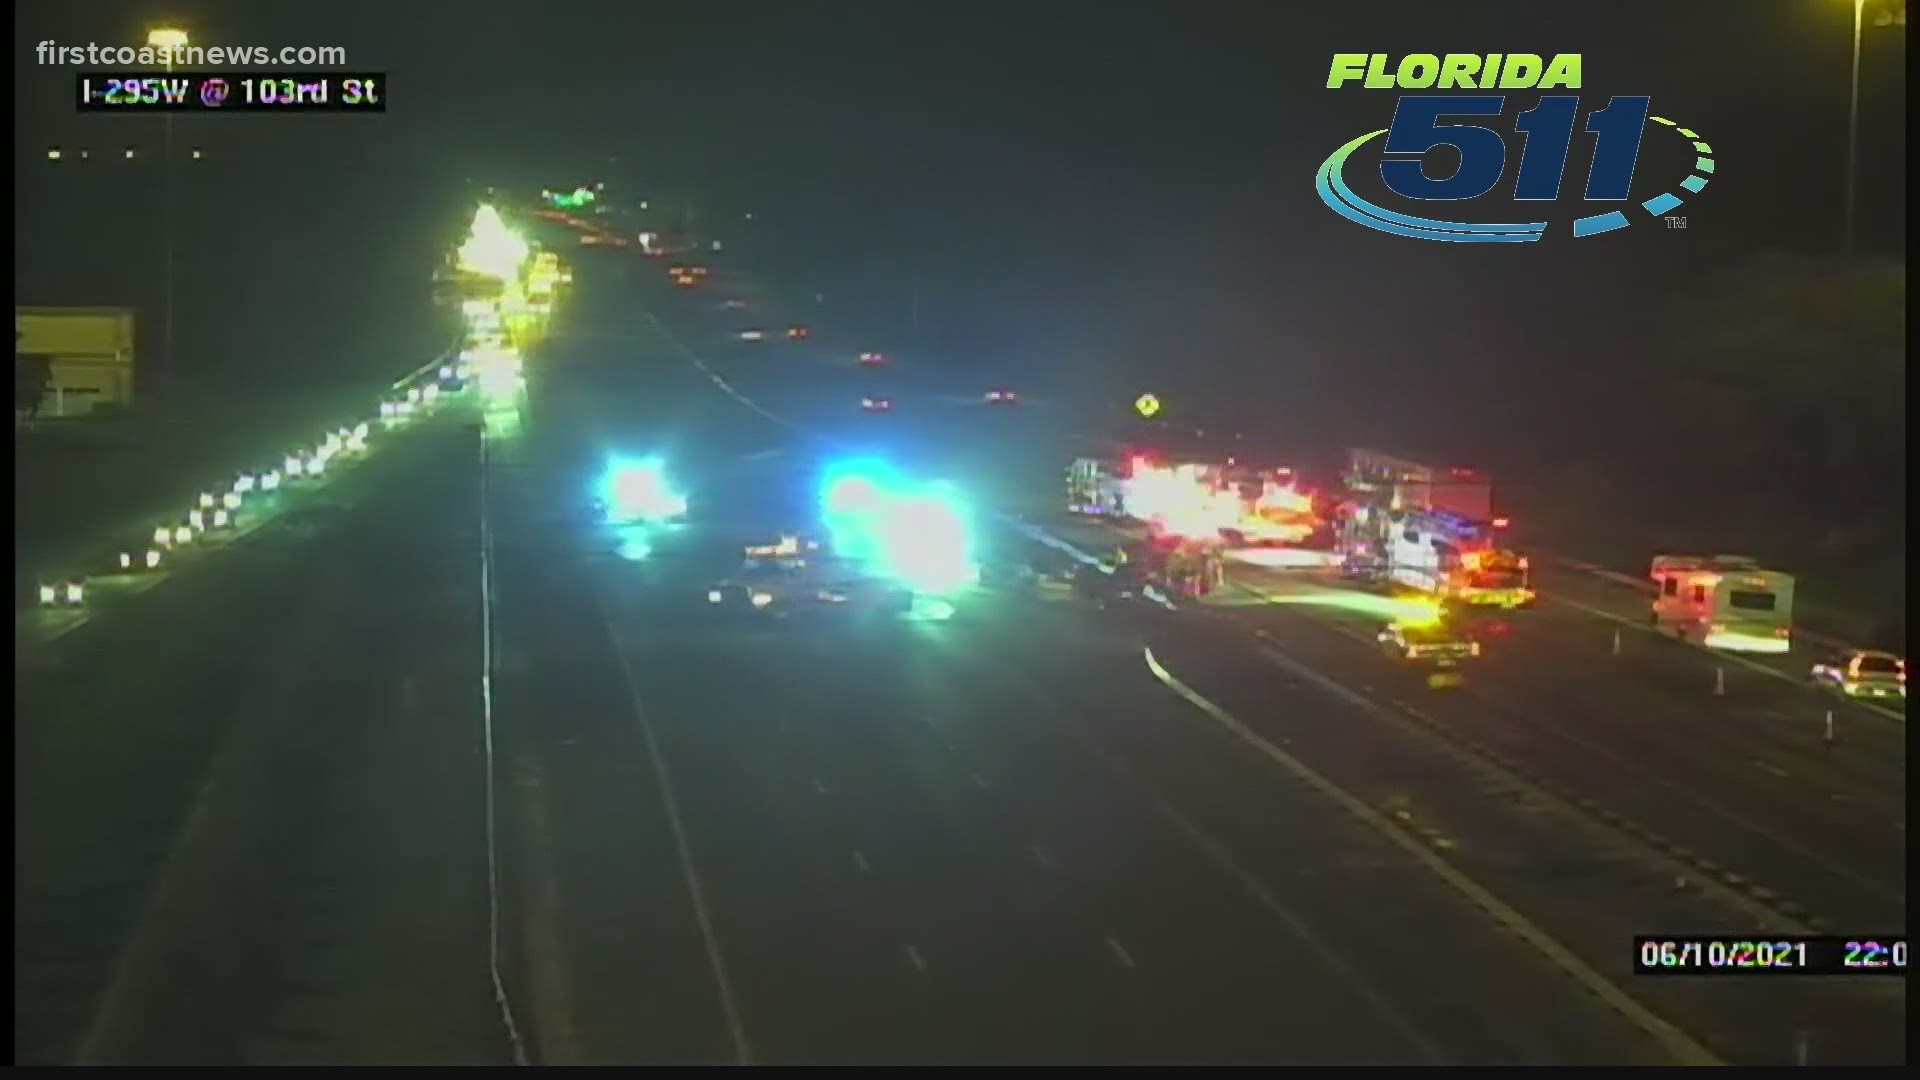 Lanes reopen after crash with injuries on I-295 in Jacksonville